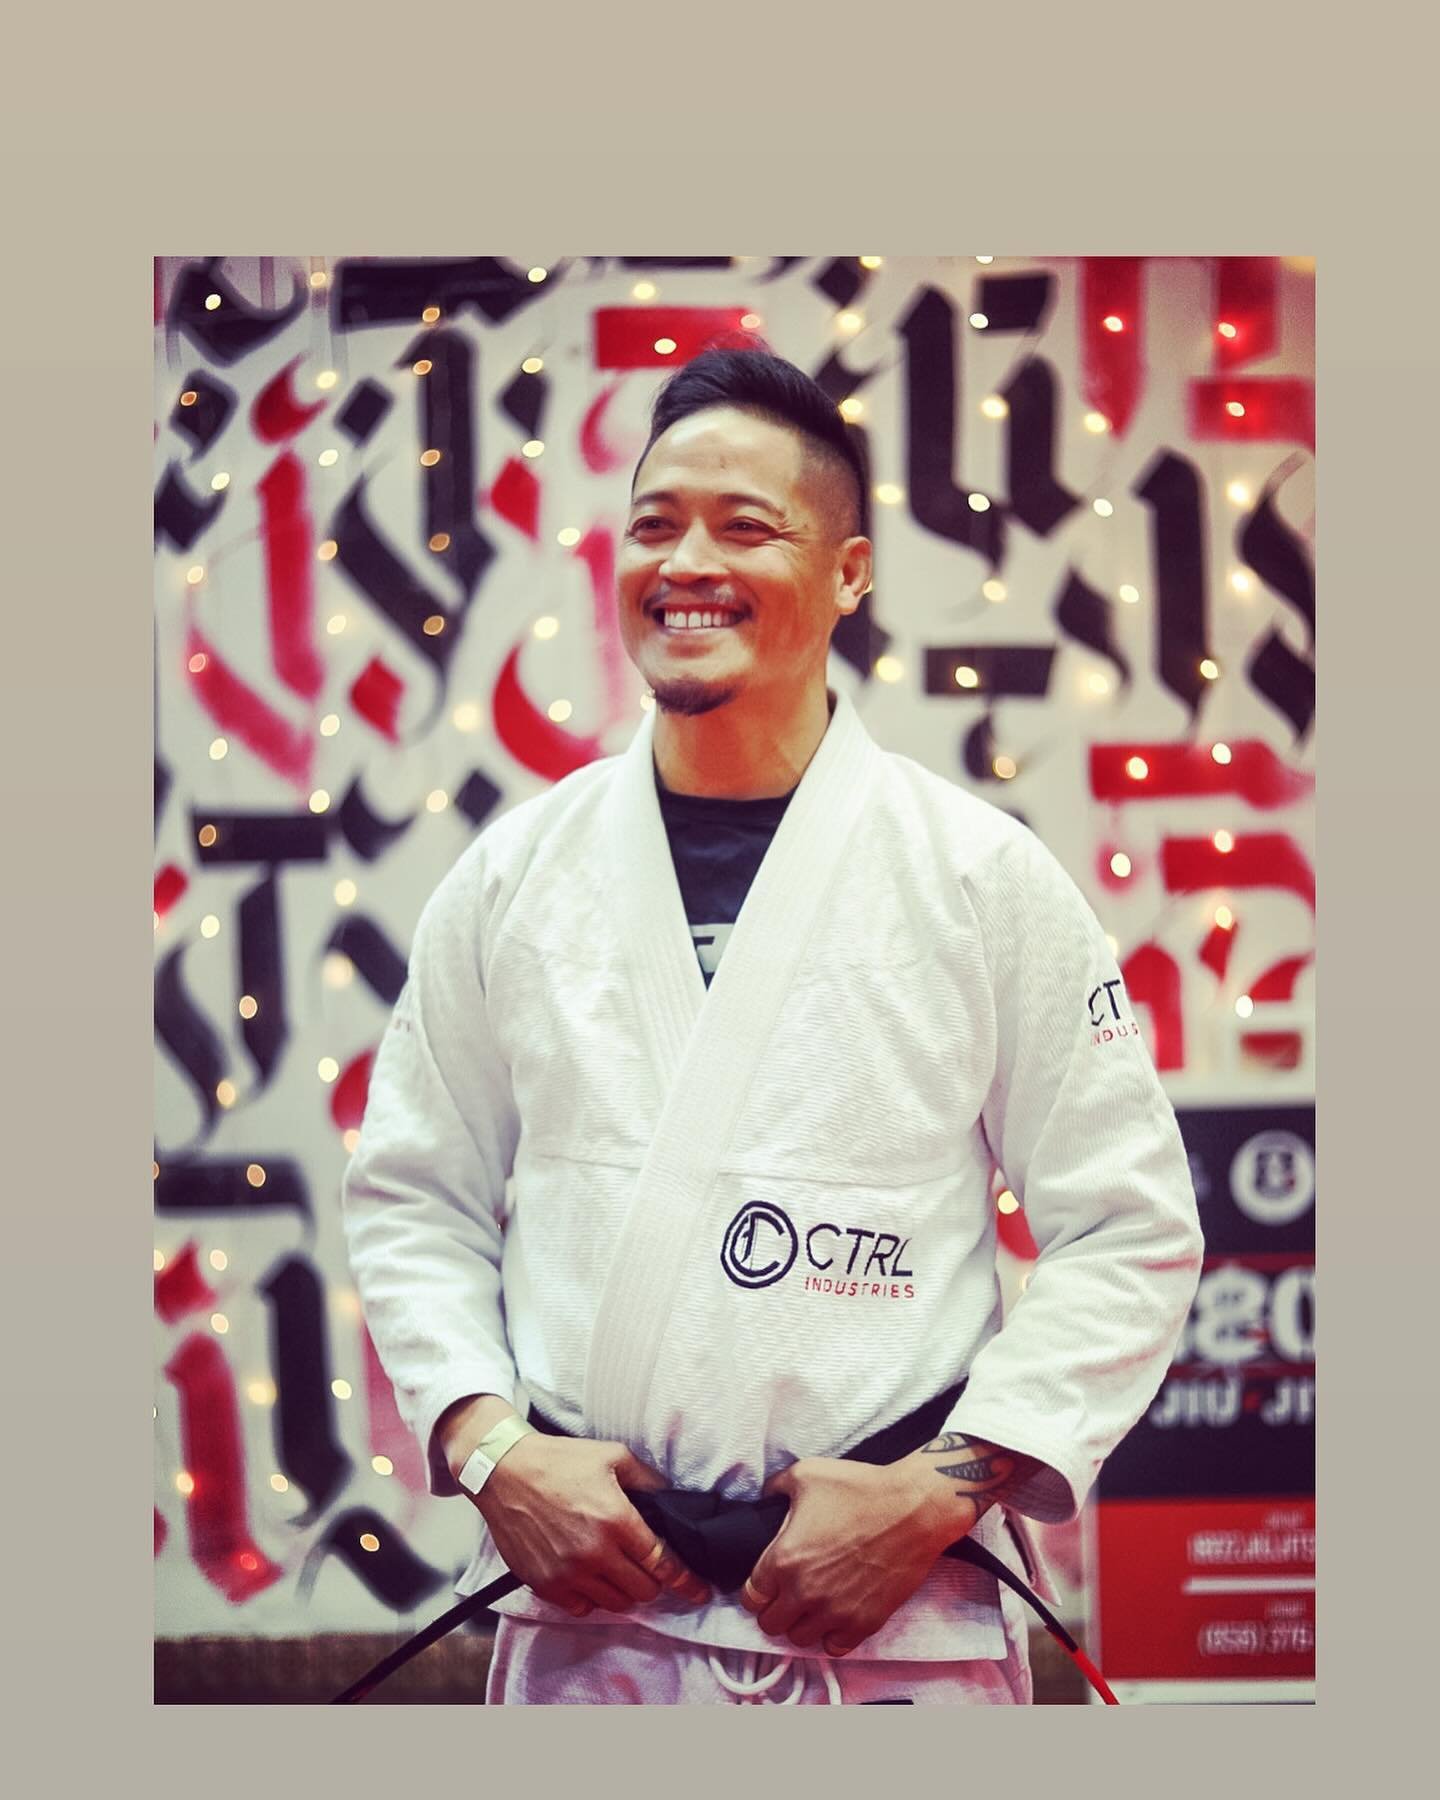 Wishing Professor Ric a Happy (special 5-0) Birthday! Thank you for your dedication and all you do for 1802! We hope you are getting the rest and relaxation you deserve. @jiujit_soul #happy50thbirthday #1802family #jiujitsu #ranchobernardojiujitsu #b